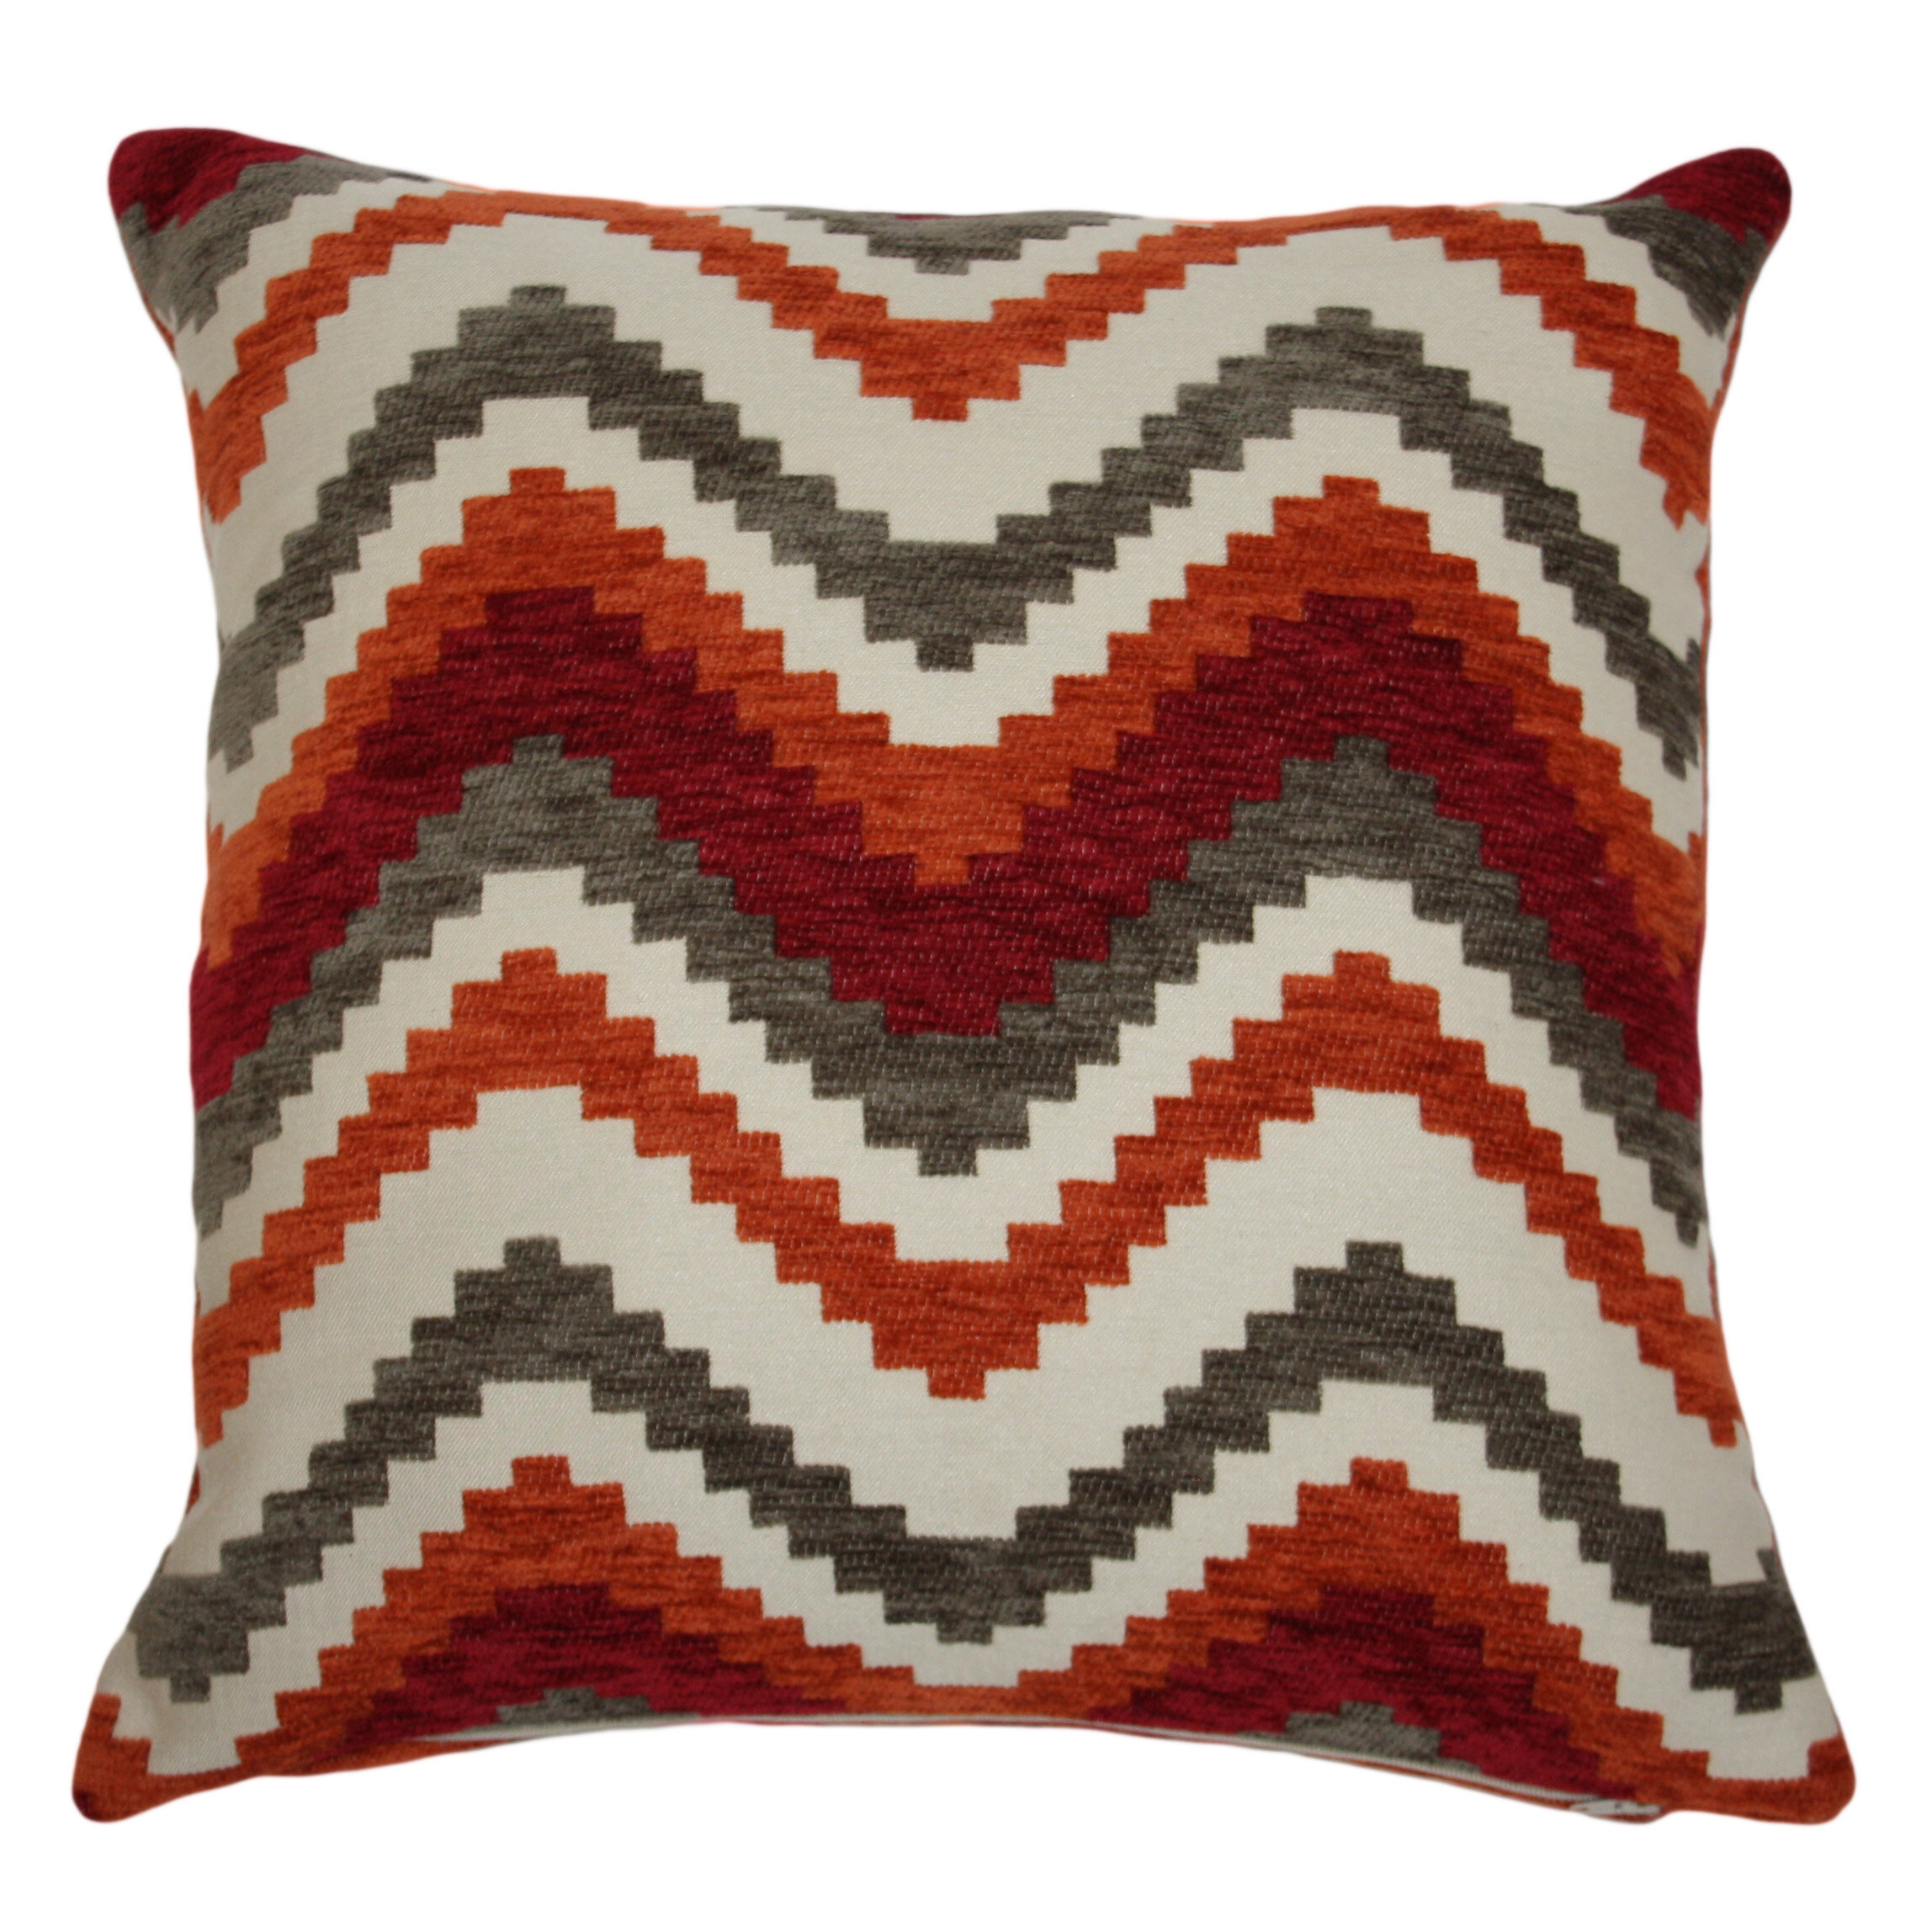 Chenille cushion covers 18" by 18" soft heavyweight quality fabric modern design 